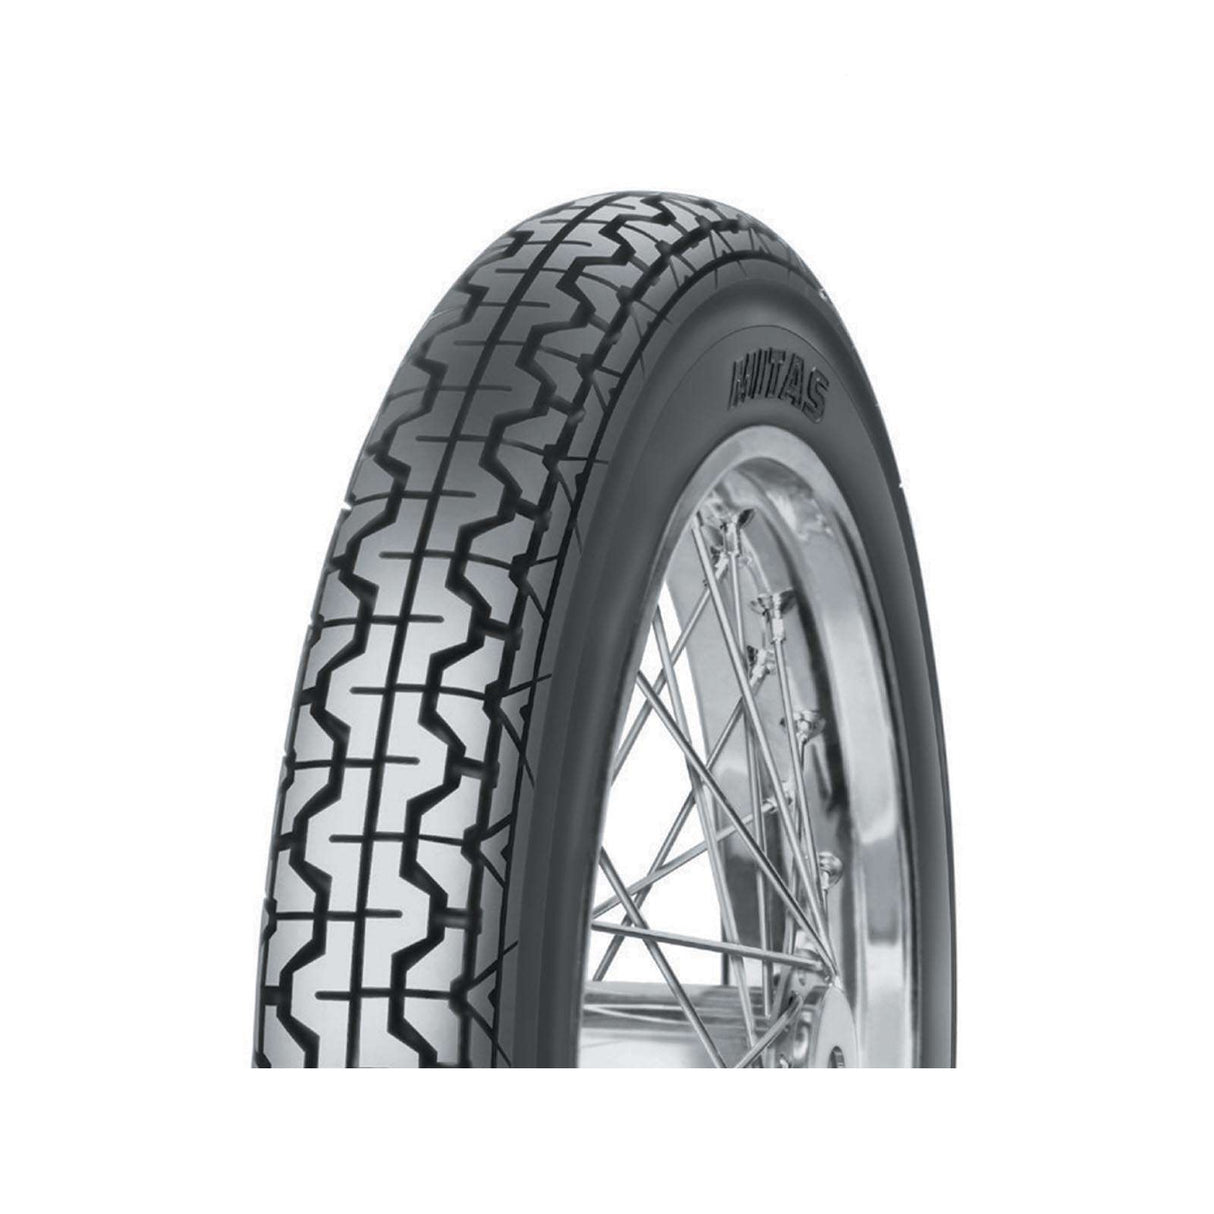 3.25-16 H05 Classic Reinf. Mitas Highway Tyre